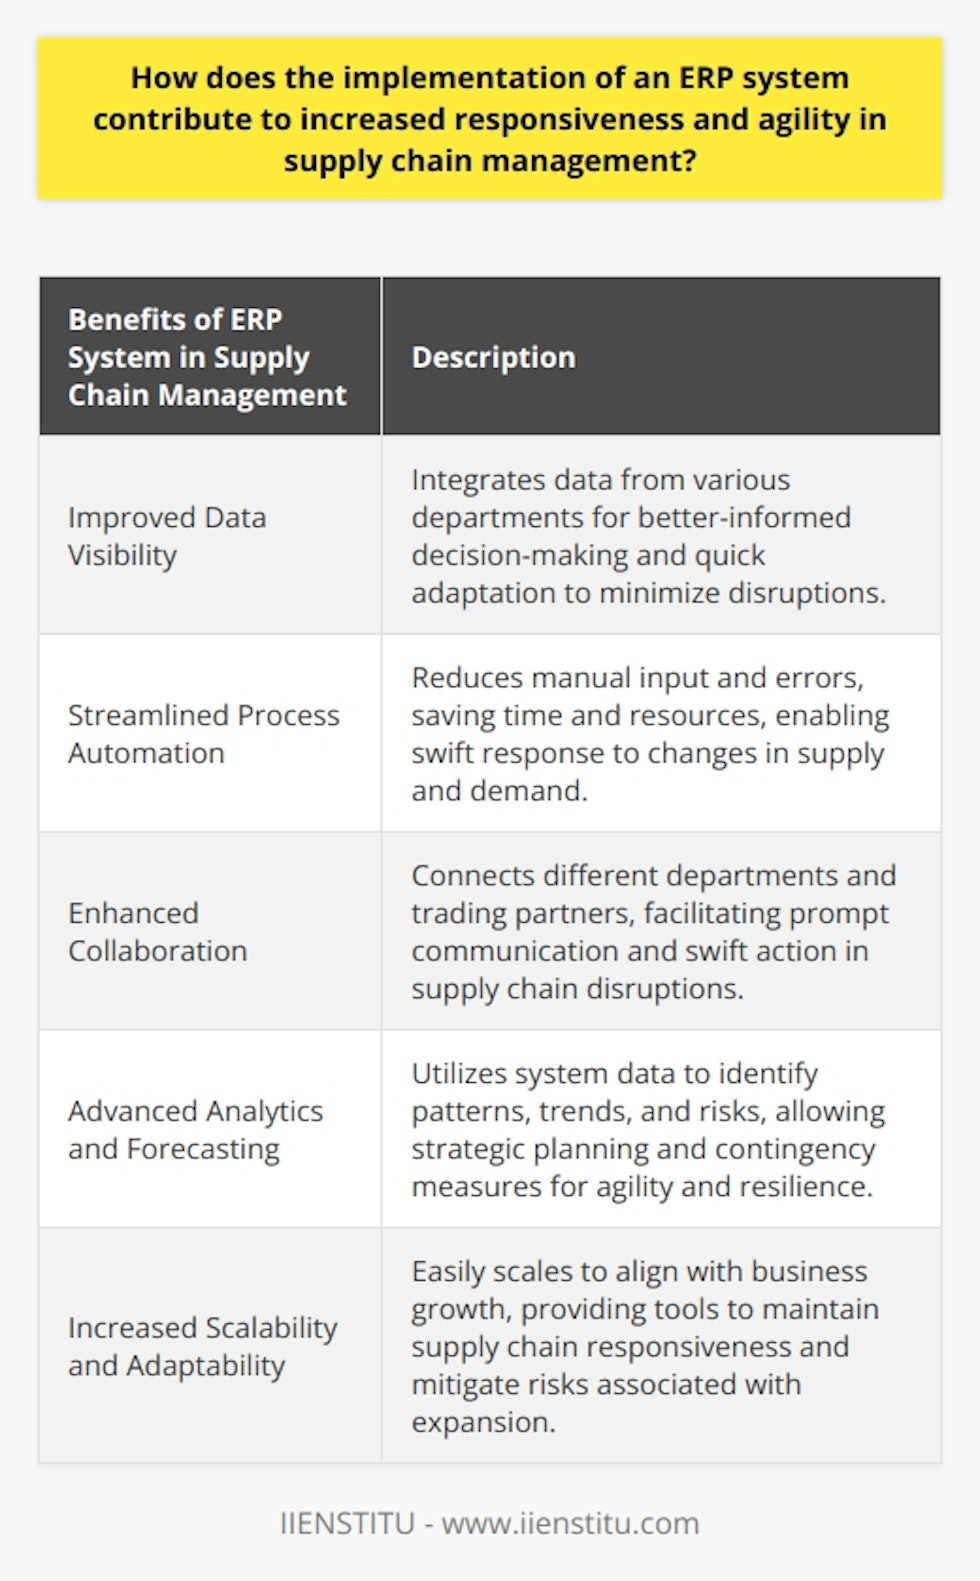 An ERP system plays a crucial role in enhancing the responsiveness and agility of supply chain management. By offering improved data visibility, streamlined process automation, enhanced collaboration, advanced analytics, and increased scalability, ERP systems enable organizations to effectively respond to changes and disruptions in the supply chain.One significant advantage of implementing an ERP system is the improved data visibility it provides. By integrating data from various departments such as procurement, production, warehousing, and distribution, businesses can make better-informed decisions. This comprehensive visibility allows organizations to quickly adapt their operations to minimize disruptions and maintain optimal performance.In addition, ERP systems automate many supply chain processes, reducing manual input and errors. This streamlining of processes saves time and resources, enabling businesses to respond swiftly to changes in supply and demand. Automation also facilitates proactive decision-making, as real-time data can be leveraged to anticipate potential issues and implement adjustments promptly.An ERP system also fosters enhanced collaboration and communication among supply chain stakeholders. By connecting different departments and trading partners, ERP systems facilitate seamless information exchange. This connectivity leads to prompt communication and enables companies to act swiftly in the face of any supply chain disruptions, giving them a competitive edge.Furthermore, ERP systems provide advanced analytics and forecasting capabilities. By utilizing the wealth of data housed in the system, organizations can identify patterns, trends, and potential risks. This allows them to formulate strategic plans and contingency measures, making them more agile and resilient in the face of market fluctuations and disruptions.Finally, ERP systems offer scalability and adaptability to growing enterprises. As businesses expand, they require a flexible infrastructure that can support their evolving needs. ERP systems can be easily scaled to align with business growth, providing organizations with the necessary tools to maintain their supply chain's responsiveness and agility while mitigating risks associated with expansion.In conclusion, the implementation of an ERP system significantly contributes to increased responsiveness and agility in supply chain management. By offering improved data visibility, streamlined process automation, enhanced collaboration, advanced analytics, and increased scalability, ERP systems allow organizations to thrive in dynamic market conditions and minimize the effects of disruptions. Adopting an ERP system is therefore vital for businesses seeking to optimize their supply chain performance and maintain a competitive edge.